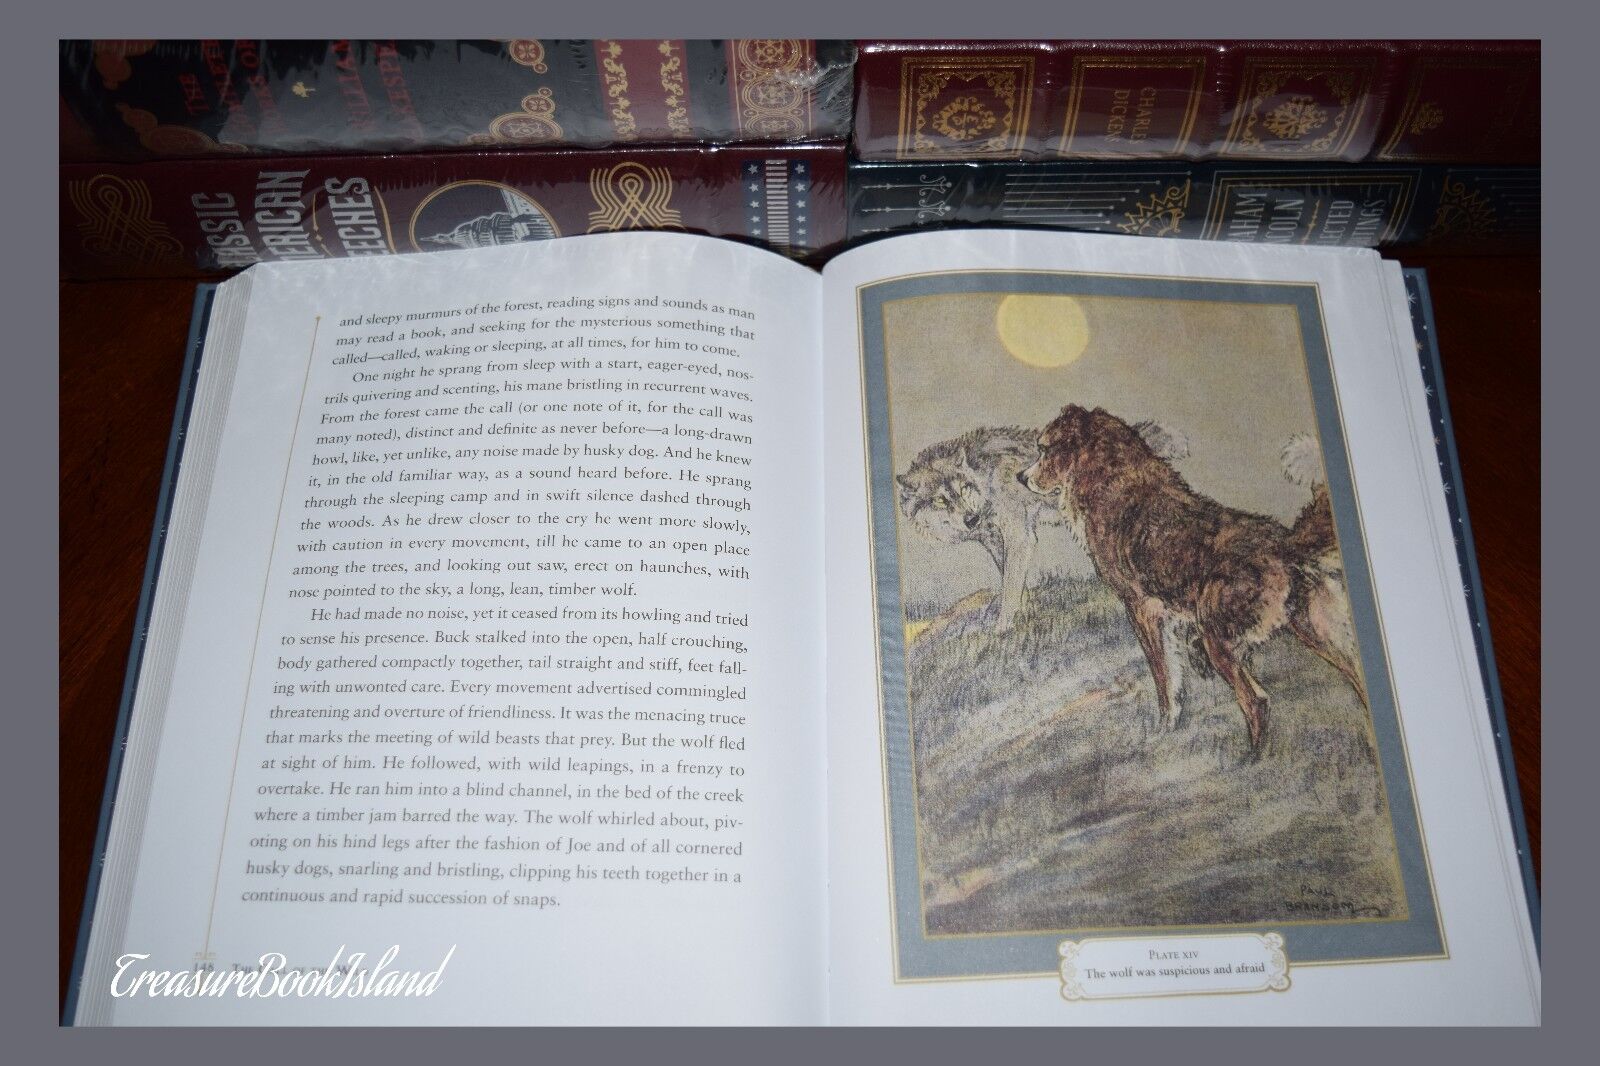 New Call of the Wild by Jack London Illustrated Leather Bound Sealed Collectible Без бренда - фотография #7